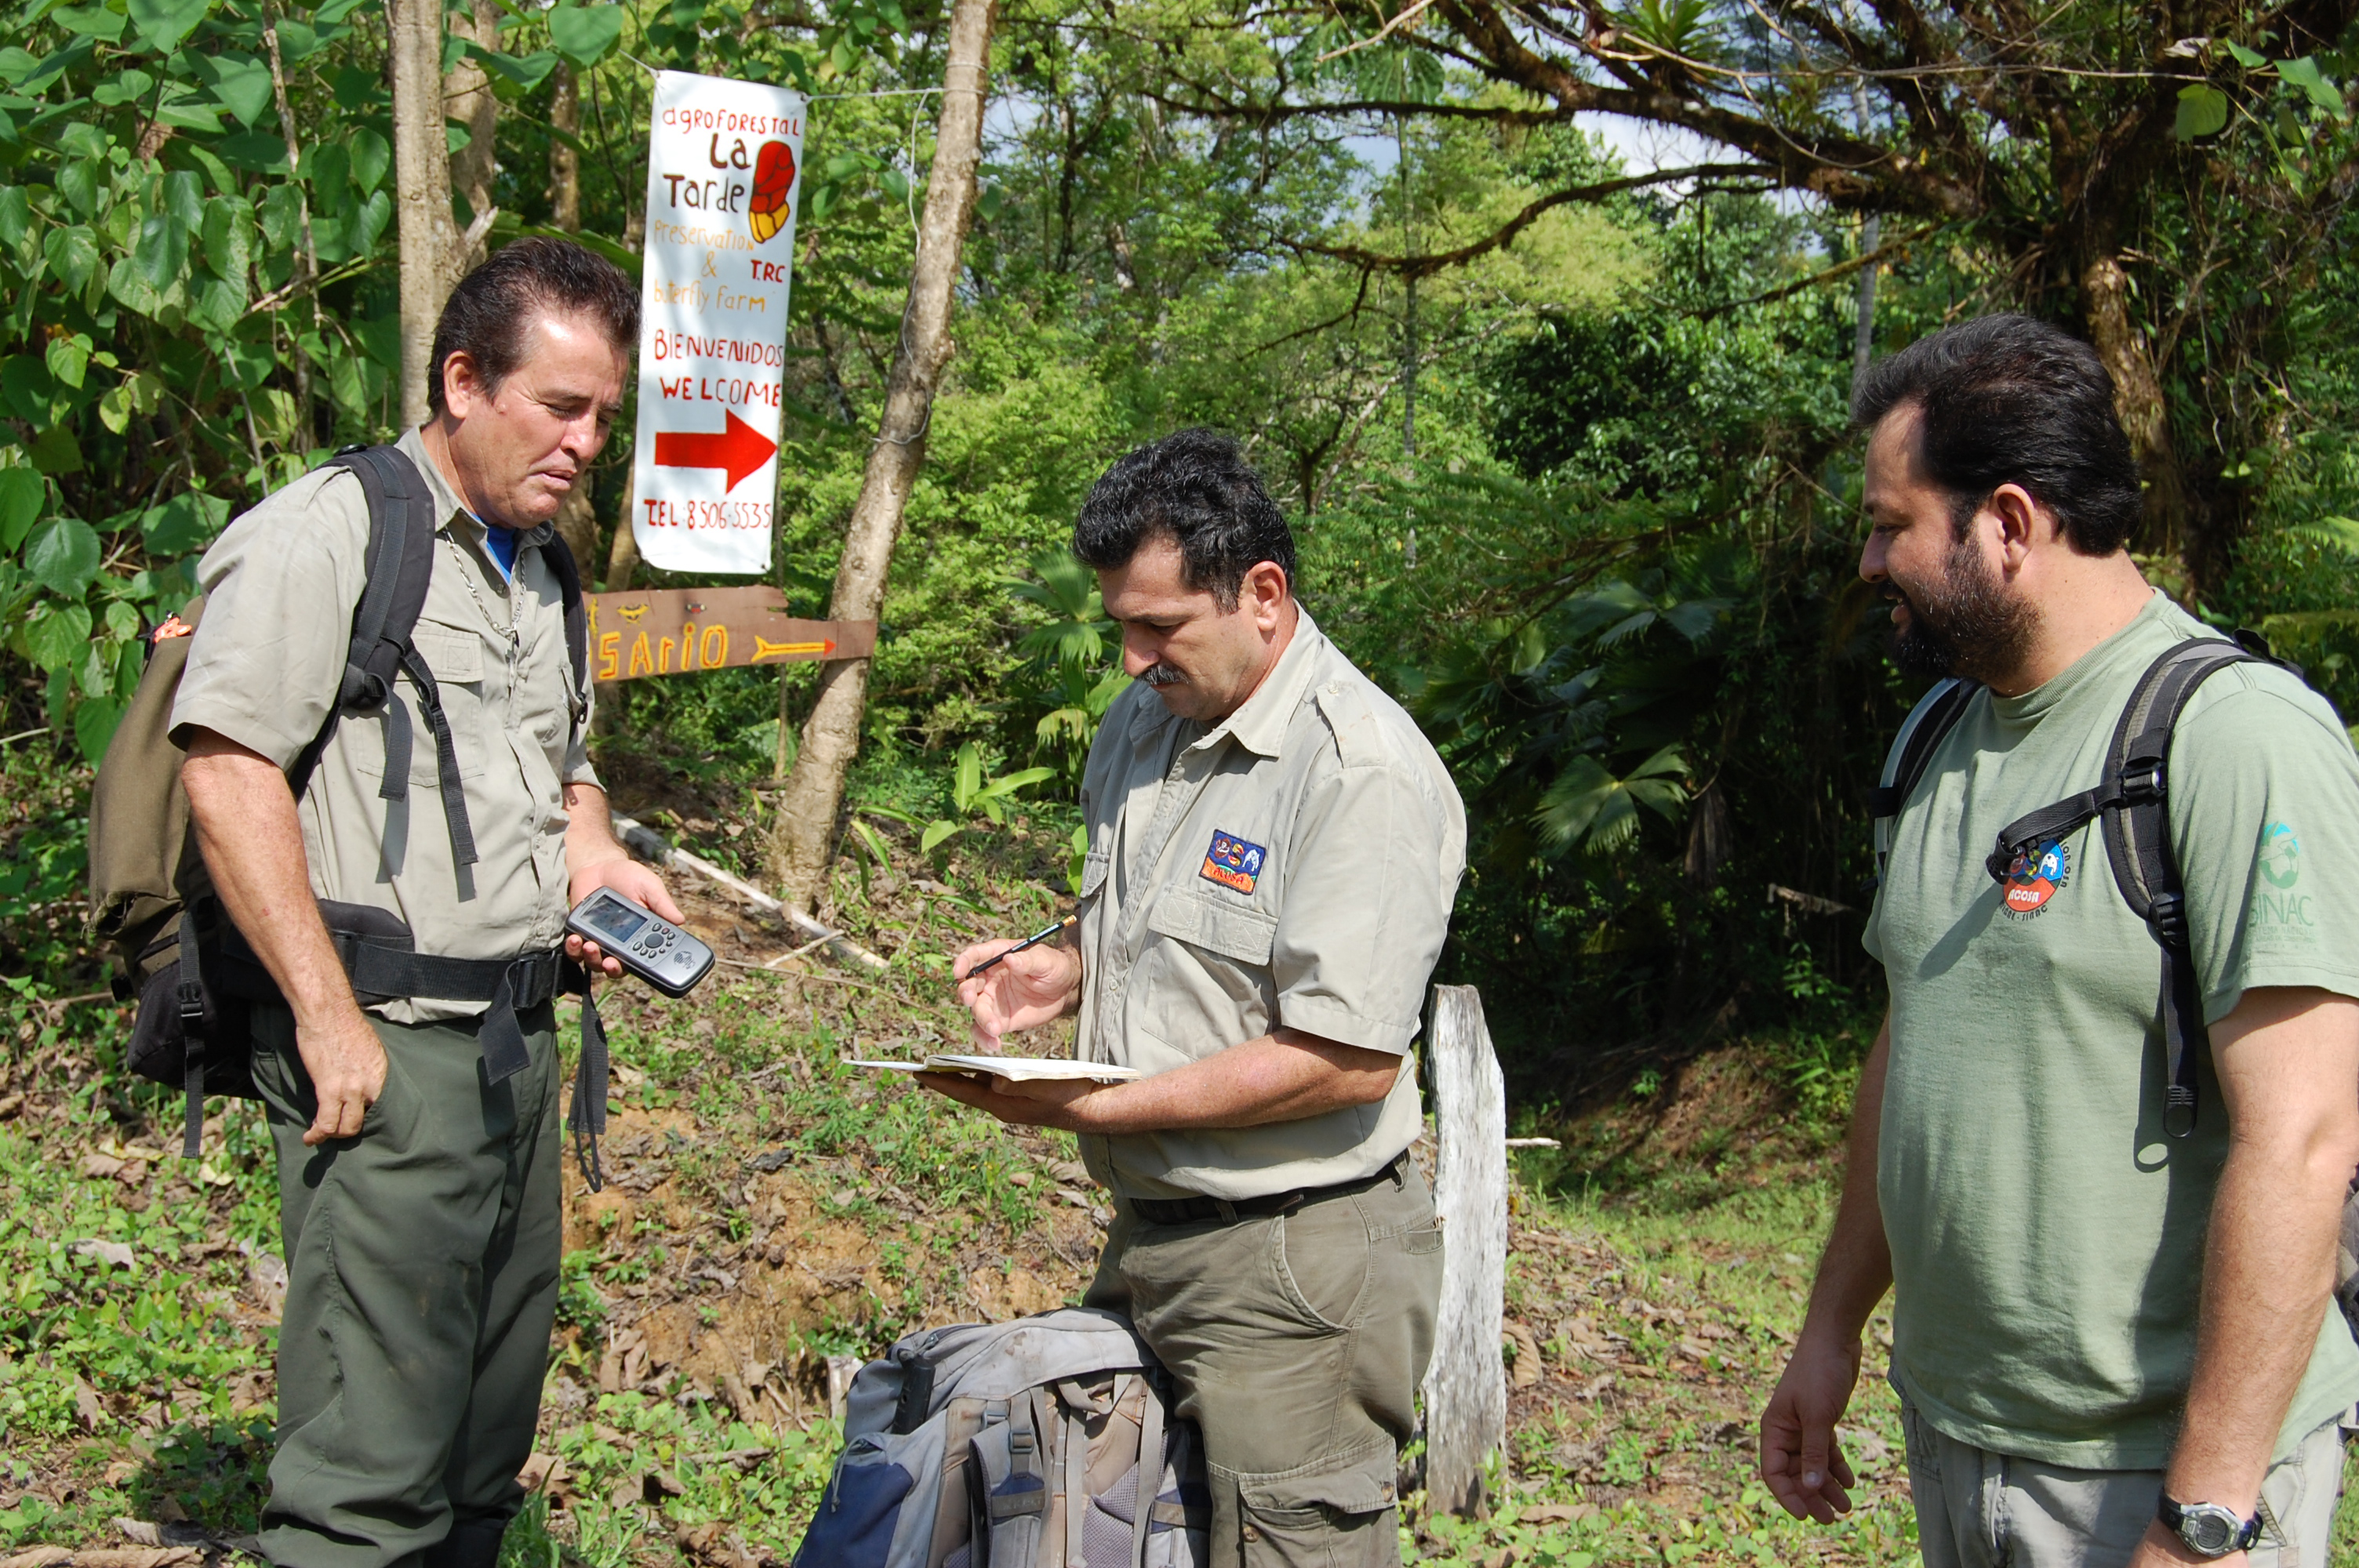 Members of a Costa Rican research team prepare to collect animal population data.